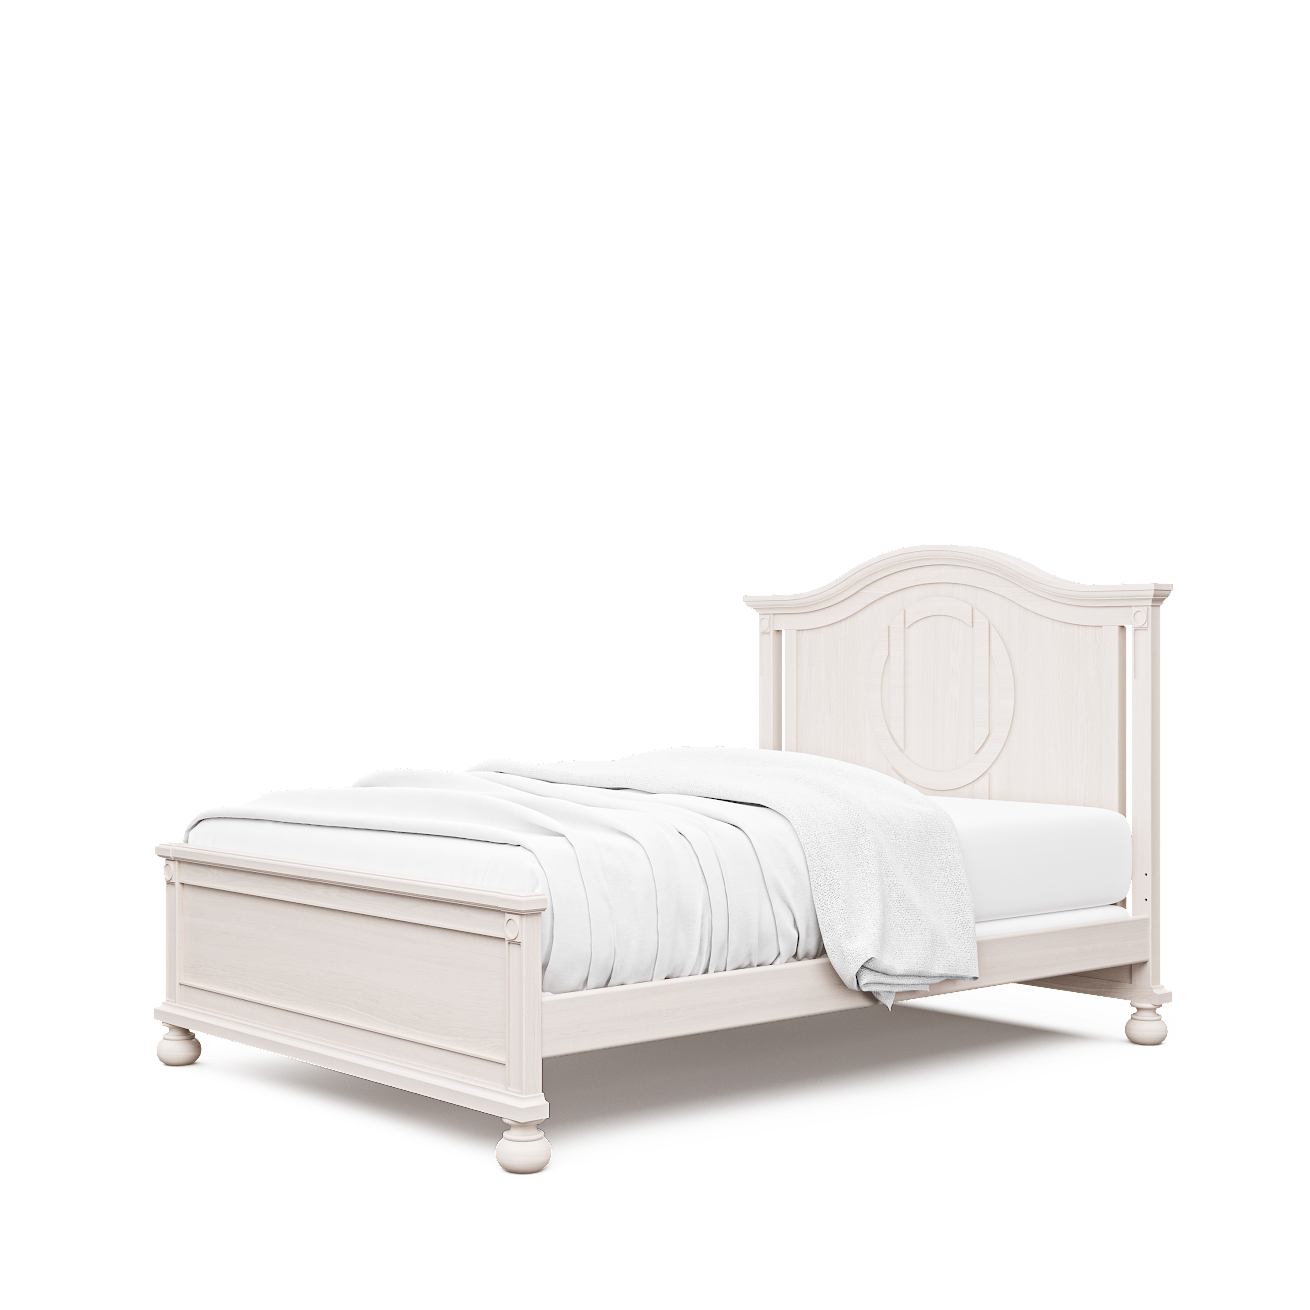 Dakota crib, converted to full bed (shown with optional low profile footboard), in washed white